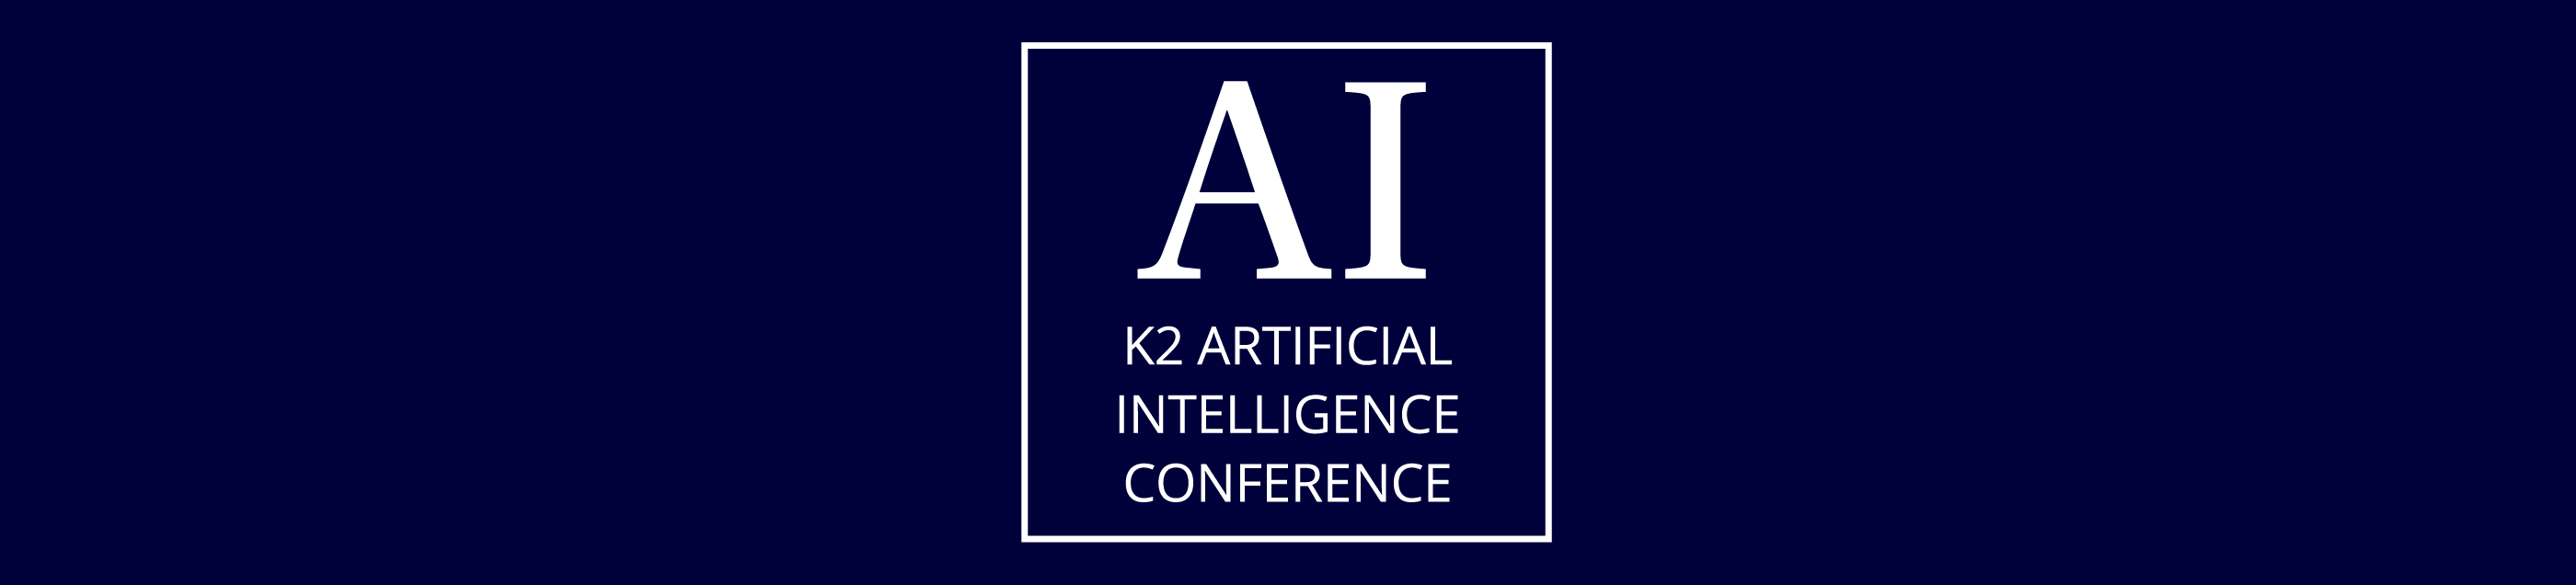 Graphic of K2 Artificial Intelligence Conference logo